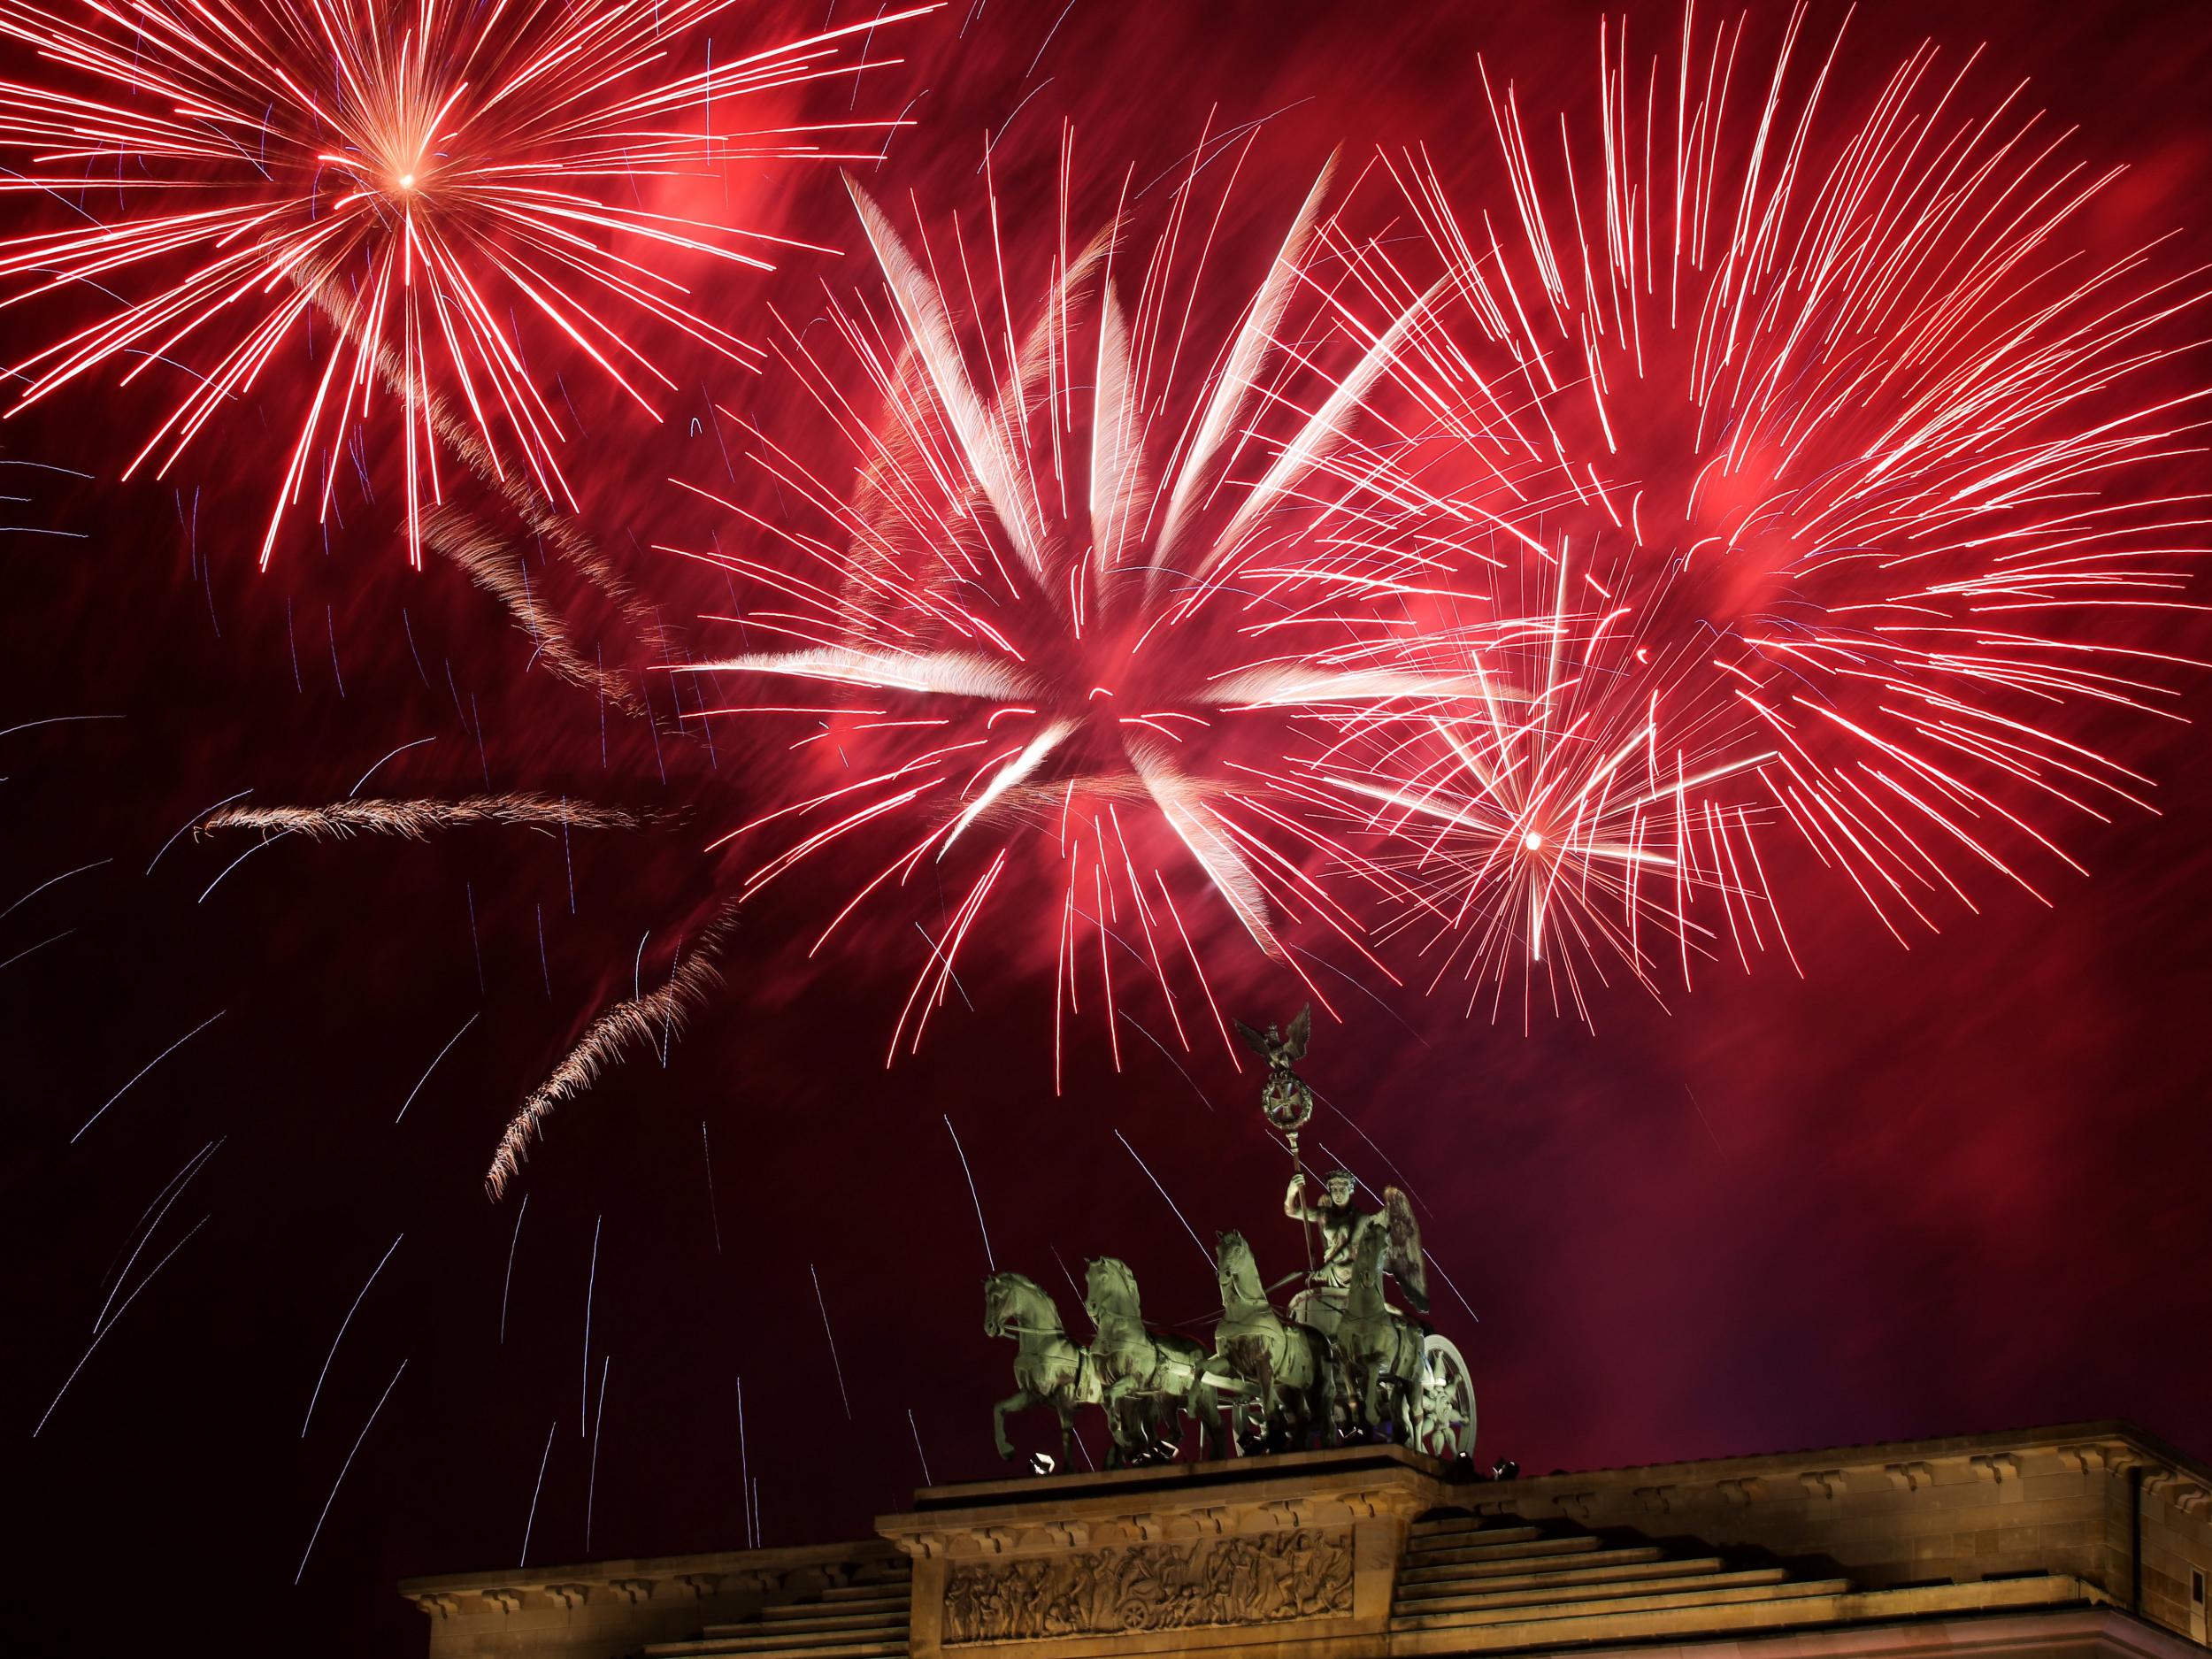 Fireworks explode behind the Quadriga statue of the Brandenburg Gate on the occasion of New Year's Eve celebrations in Berlin